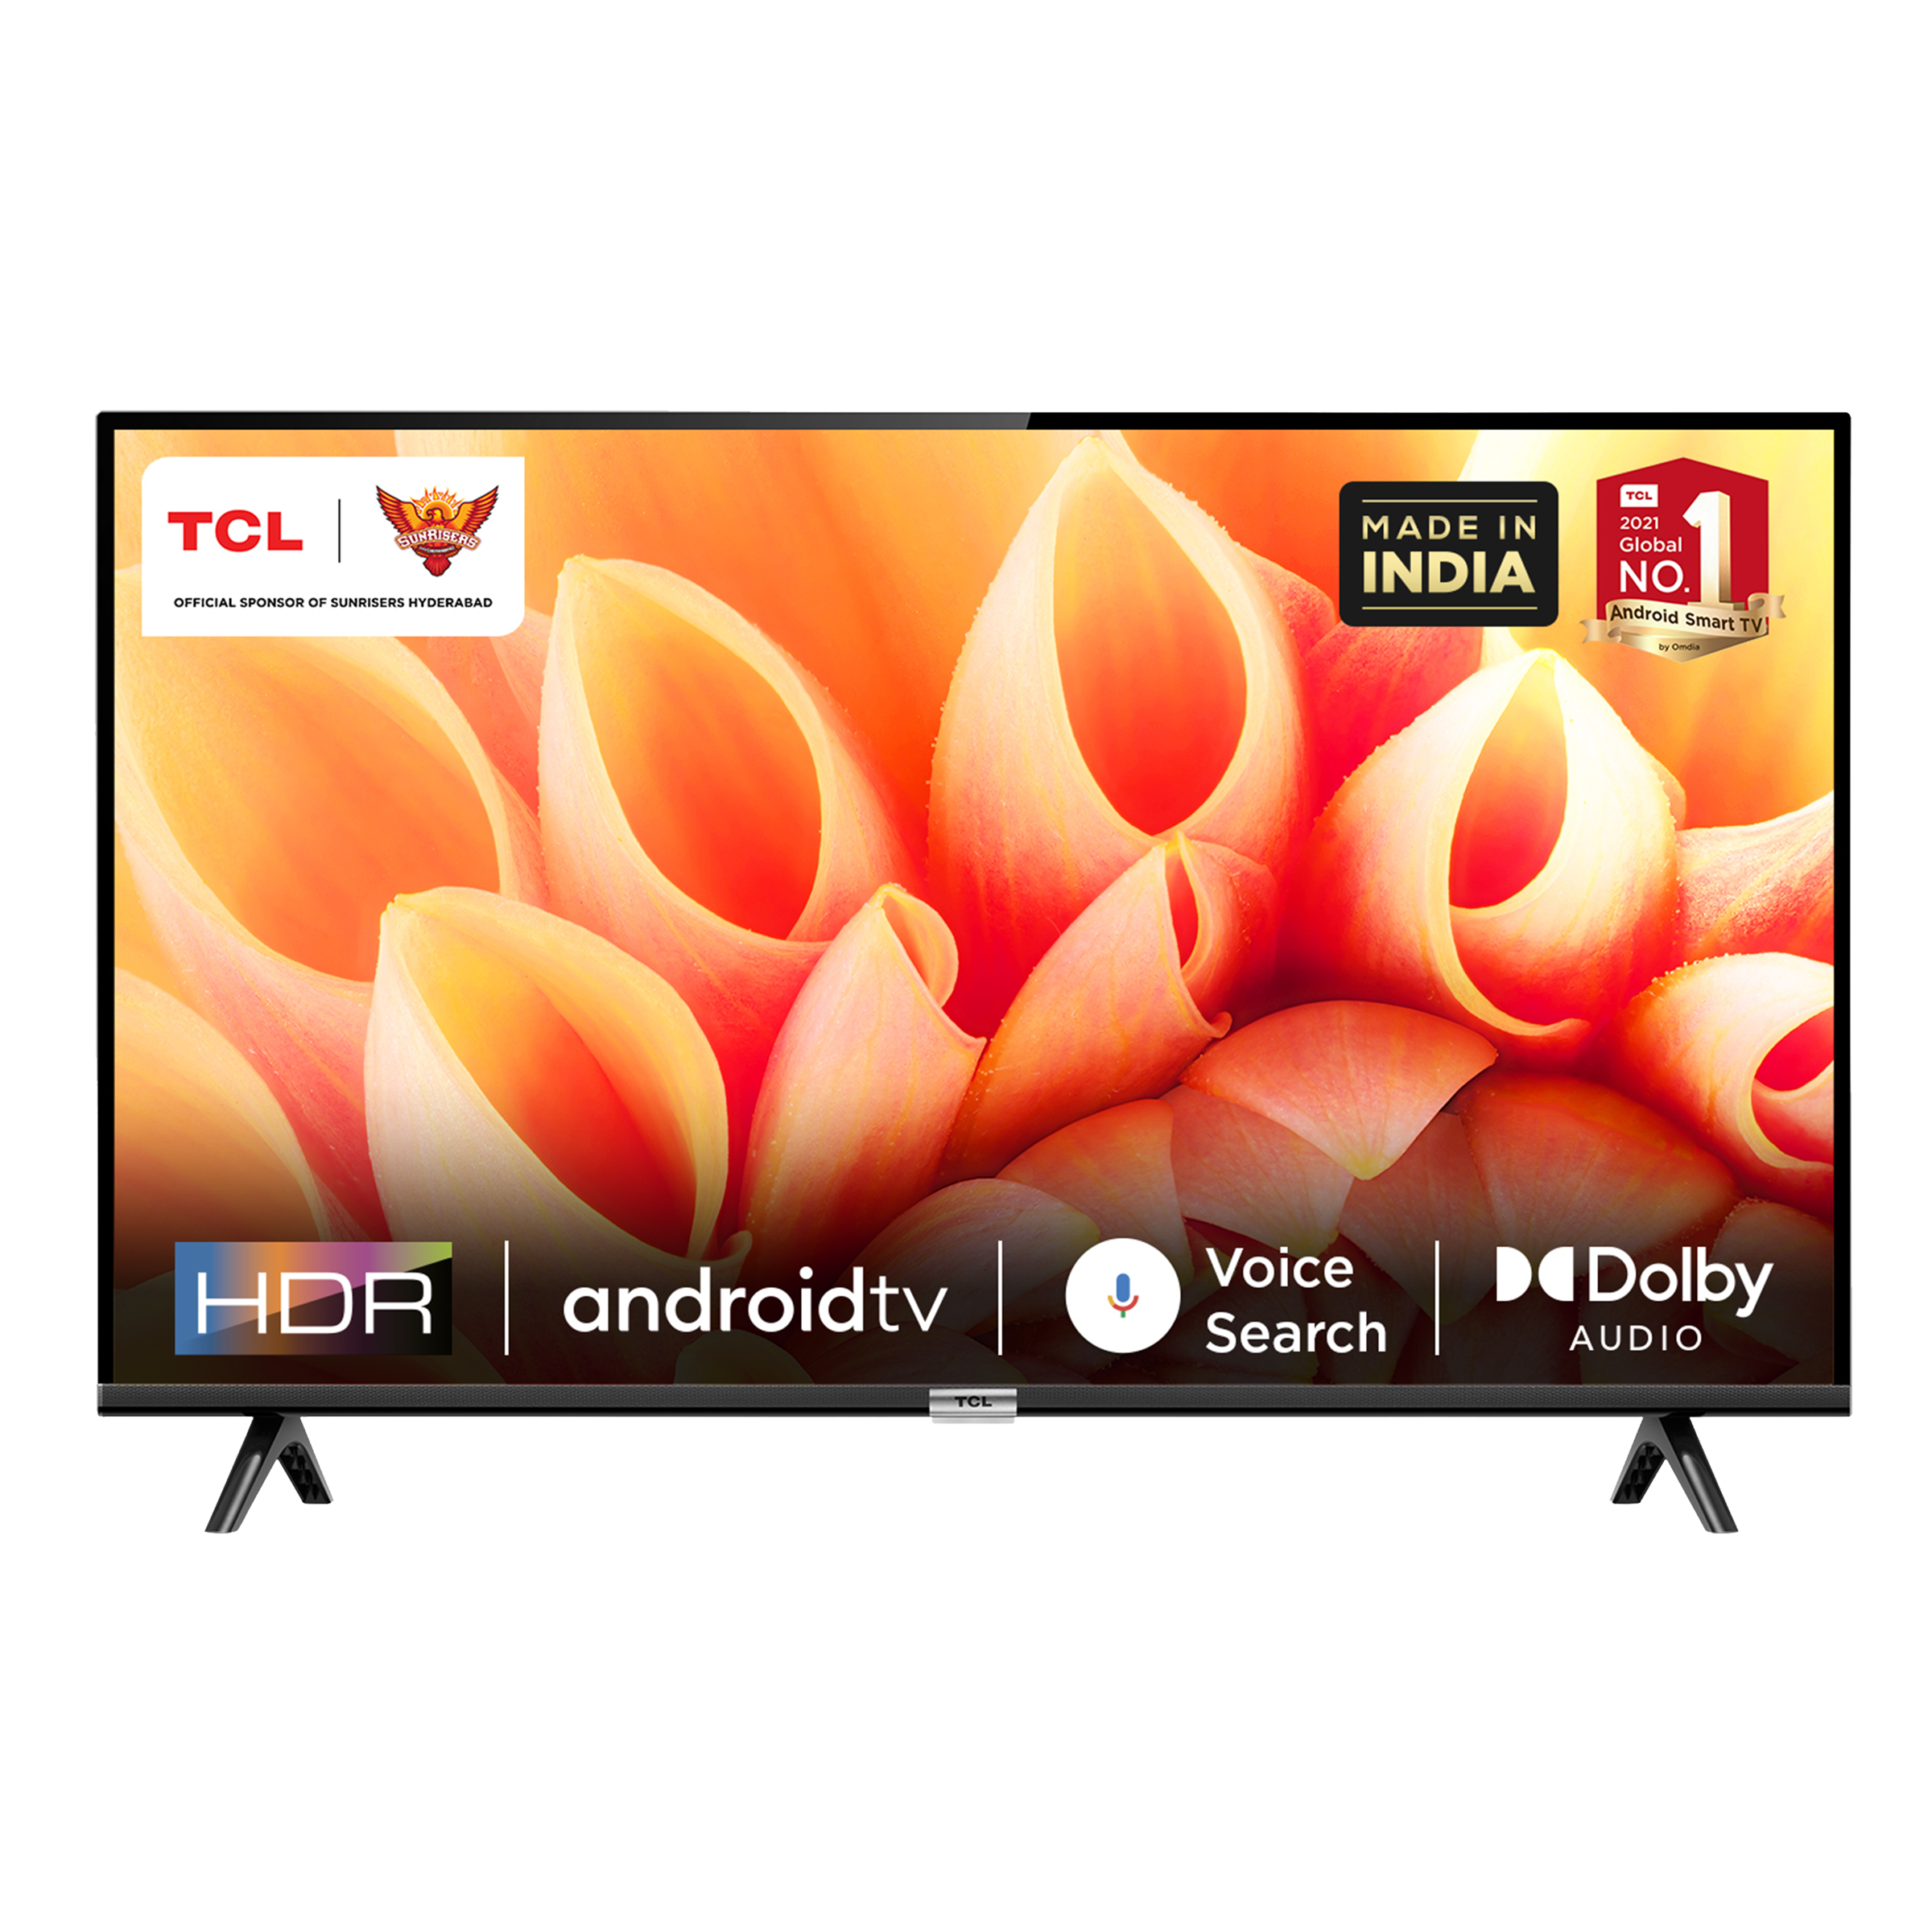 TCL S Series 101cm (40 Inch) Full HD Android Smart TV (Dolby Audio, 40S5205, Black)_1